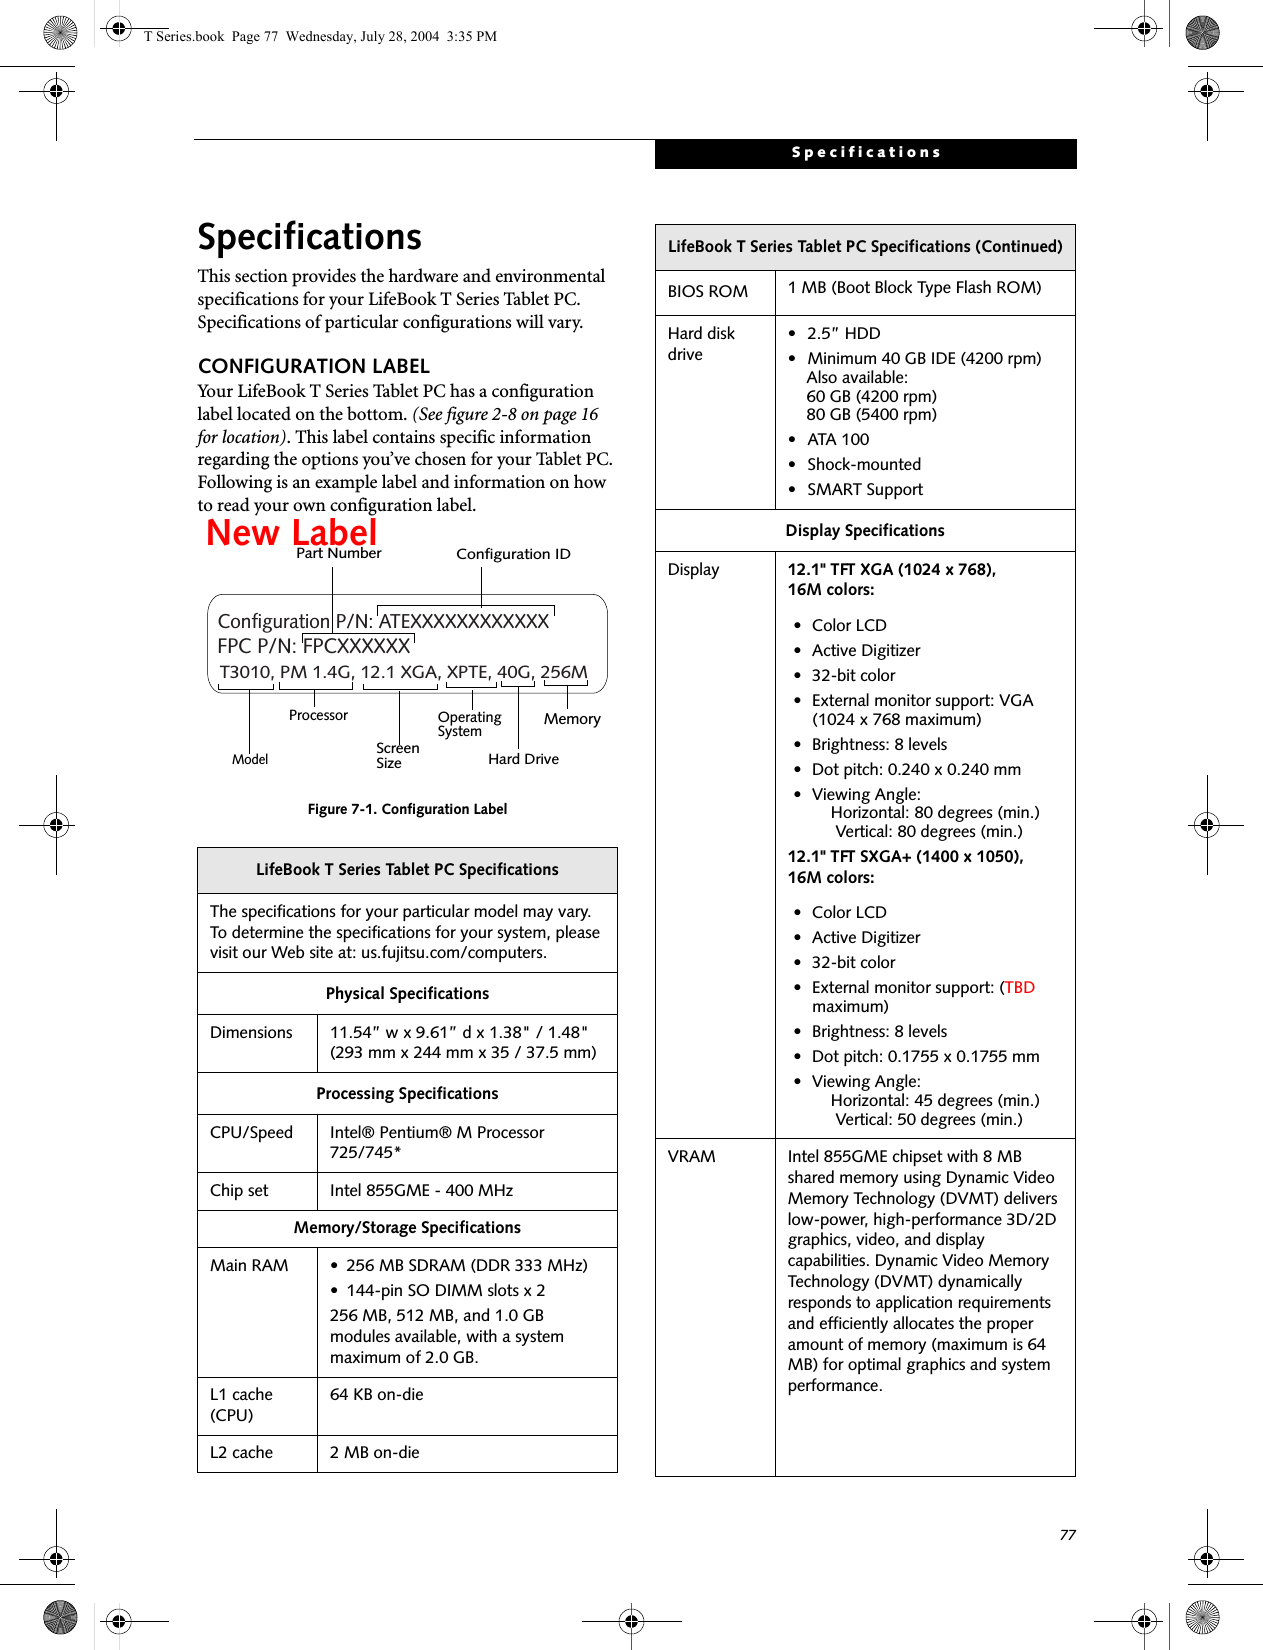 77SpecificationsSpecificationsThis section provides the hardware and environmental specifications for your LifeBook T Series Tablet PC. Specifications of particular configurations will vary.CONFIGURATION LABELYour LifeBook T Series Tablet PC has a configuration label located on the bottom. (See figure 2-8 on page 16 for location). This label contains specific information regarding the options you’ve chosen for your Tablet PC. Following is an example label and information on how to read your own configuration label.Figure 7-1. Configuration LabelLifeBook T Series Tablet PC SpecificationsThe specifications for your particular model may vary. To determine the specifications for your system, please visit our Web site at: us.fujitsu.com/computers.Physical SpecificationsDimensions 11.54” w x 9.61” d x 1.38&quot; / 1.48&quot; (293 mm x 244 mm x 35 / 37.5 mm)Processing SpecificationsCPU/Speed Intel® Pentium® M Processor 725/745* Chip set Intel 855GME - 400 MHzMemory/Storage SpecificationsMain RAM • 256 MB SDRAM (DDR 333 MHz)• 144-pin SO DIMM slots x 2256 MB, 512 MB, and 1.0 GB modules available, with a system maximum of 2.0 GB.L1 cache (CPU)64 KB on-die L2 cache 2 MB on-die T3010, PM 1.4G, 12.1 XGA, XPTE, 40G, 256MConfiguration P/N: ATEXXXXXXXXXXXXFPC P/N: FPCXXXXXXModelProcessorScreenSizeOperatingSystemHard Drive MemoryPart NumberConfiguration IDNew LabelBIOS ROM 1 MB (Boot Block Type Flash ROM)Hard disk drive• 2.5” HDD• Minimum 40 GB IDE (4200 rpm)Also available:60 GB (4200 rpm)80 GB (5400 rpm)• ATA 100• Shock-mounted• SMART SupportDisplay SpecificationsDisplay 12.1&quot; TFT XGA (1024 x 768), 16M colors:• Color LCD• Active Digitizer• 32-bit color• External monitor support: VGA (1024 x 768 maximum)• Brightness: 8 levels• Dot pitch: 0.240 x 0.240 mm• Viewing Angle:    Horizontal: 80 degrees (min.)     Vertical: 80 degrees (min.)12.1&quot; TFT SXGA+ (1400 x 1050), 16M colors:• Color LCD• Active Digitizer• 32-bit color• External monitor support: (TBD maximum)• Brightness: 8 levels• Dot pitch: 0.1755 x 0.1755 mm• Viewing Angle:    Horizontal: 45 degrees (min.)     Vertical: 50 degrees (min.)VRAM Intel 855GME chipset with 8 MB shared memory using Dynamic Video Memory Technology (DVMT) delivers low-power, high-performance 3D/2D graphics, video, and display capabilities. Dynamic Video Memory Technology (DVMT) dynamically responds to application requirements and efficiently allocates the proper amount of memory (maximum is 64 MB) for optimal graphics and system performance. LifeBook T Series Tablet PC Specifications (Continued)T Series.book  Page 77  Wednesday, July 28, 2004  3:35 PM